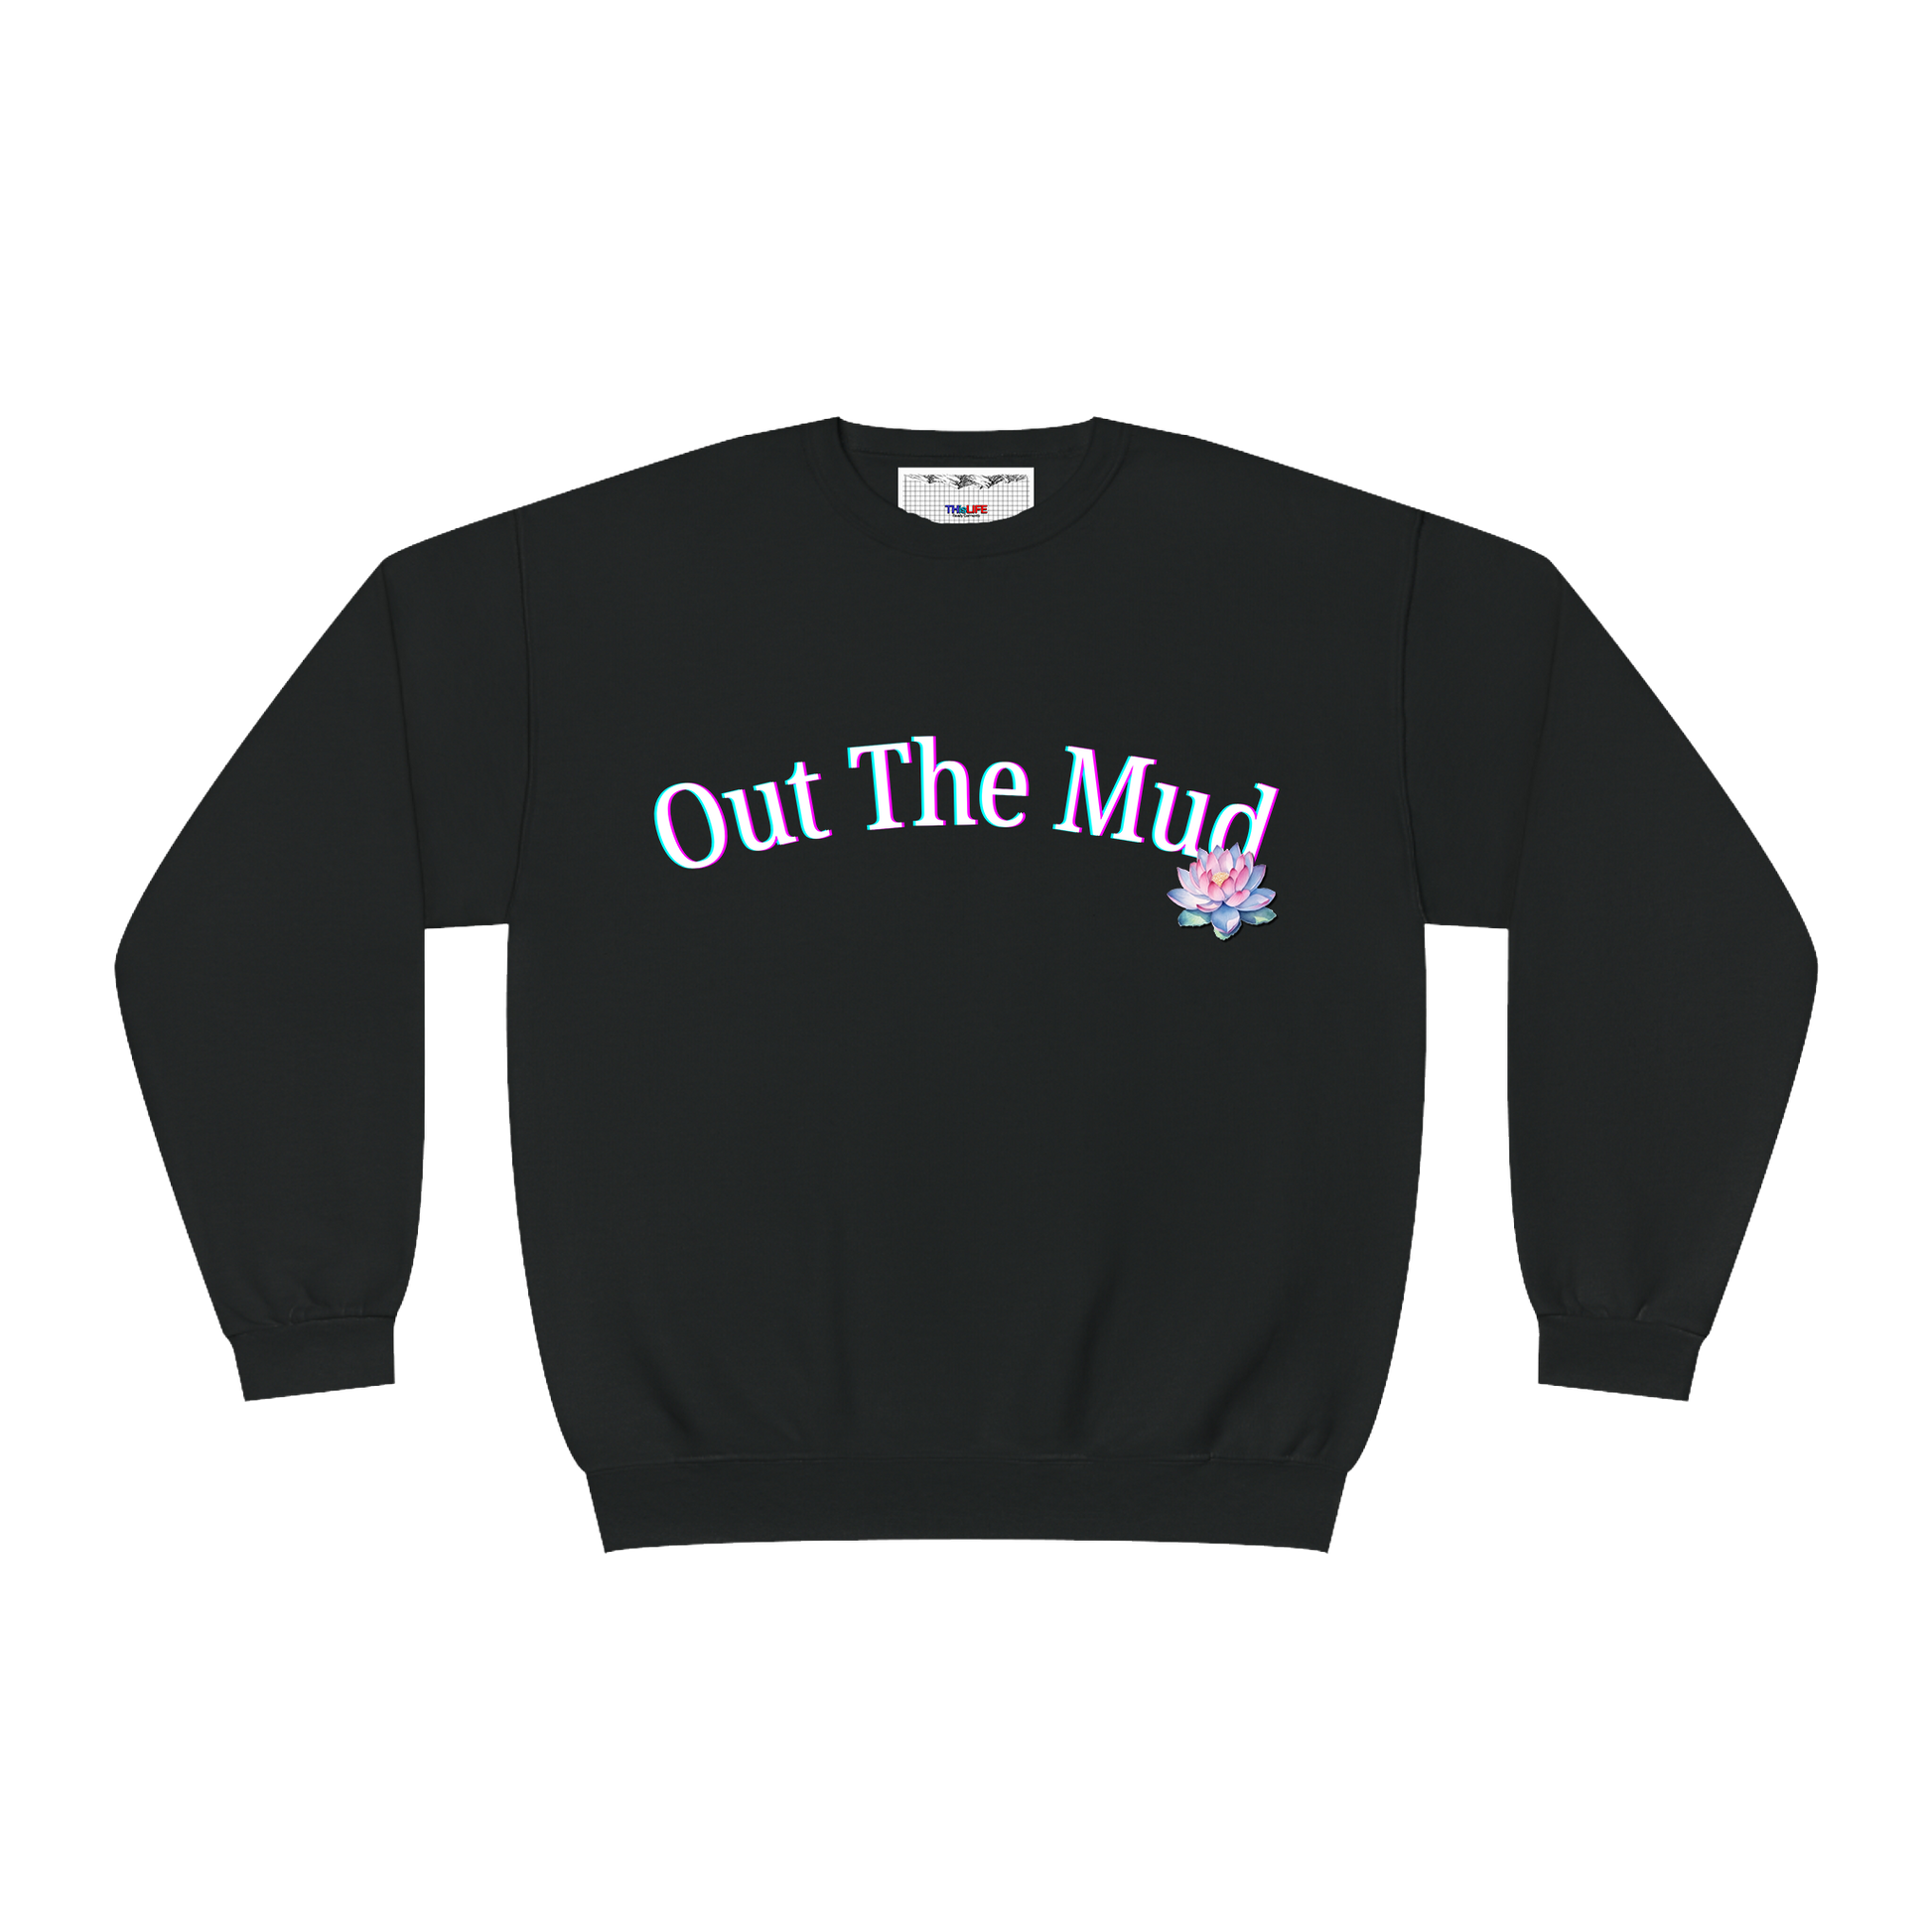 black out the mud crewneck sweater with psalm 40 1 and 2 scripture and lotus flower design